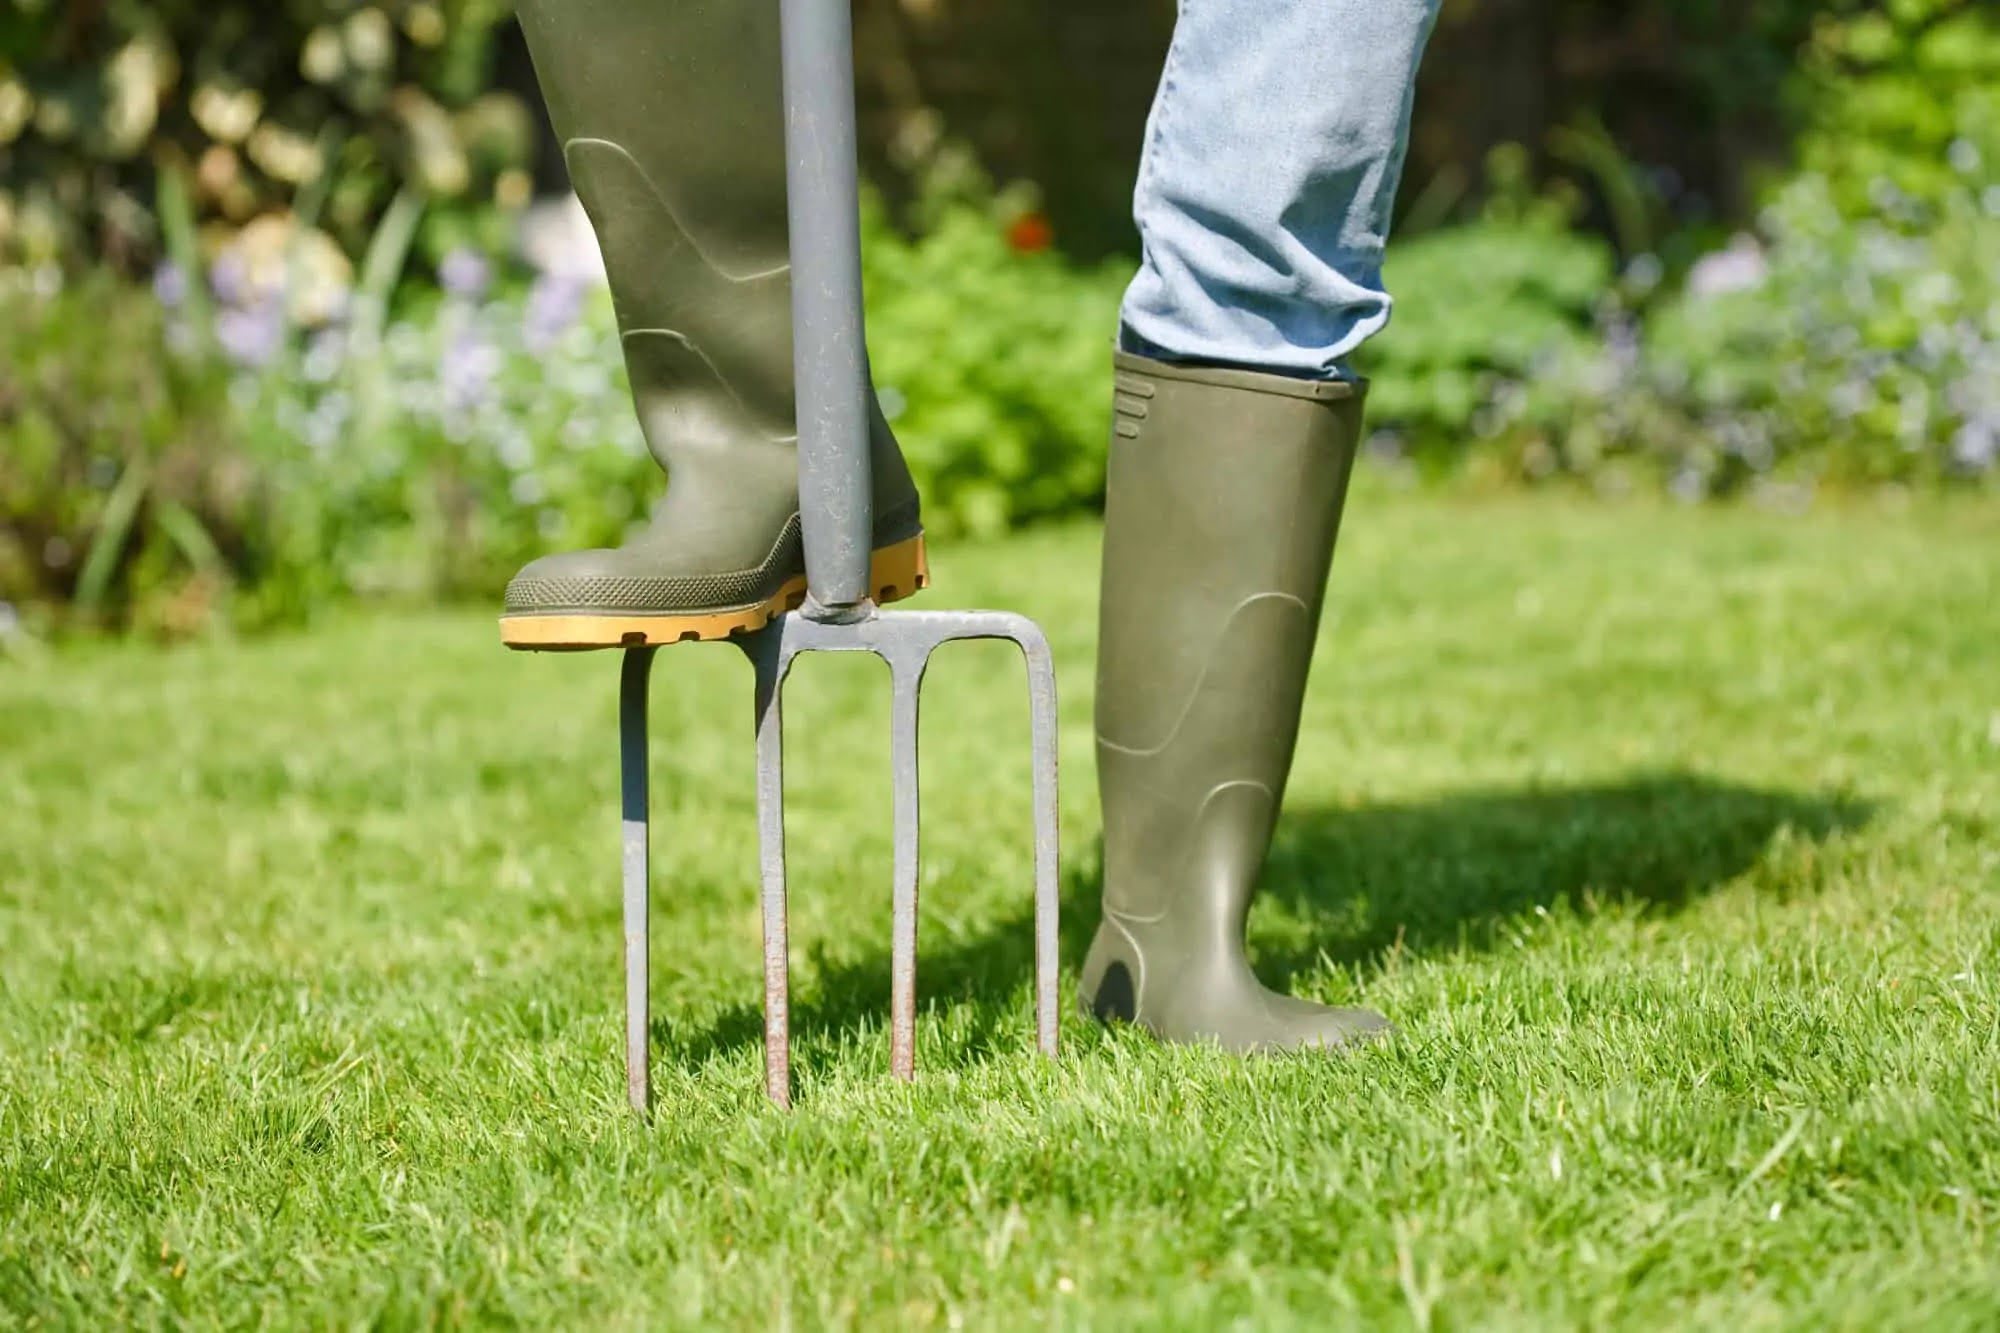 When Should Lawns Be Aerated